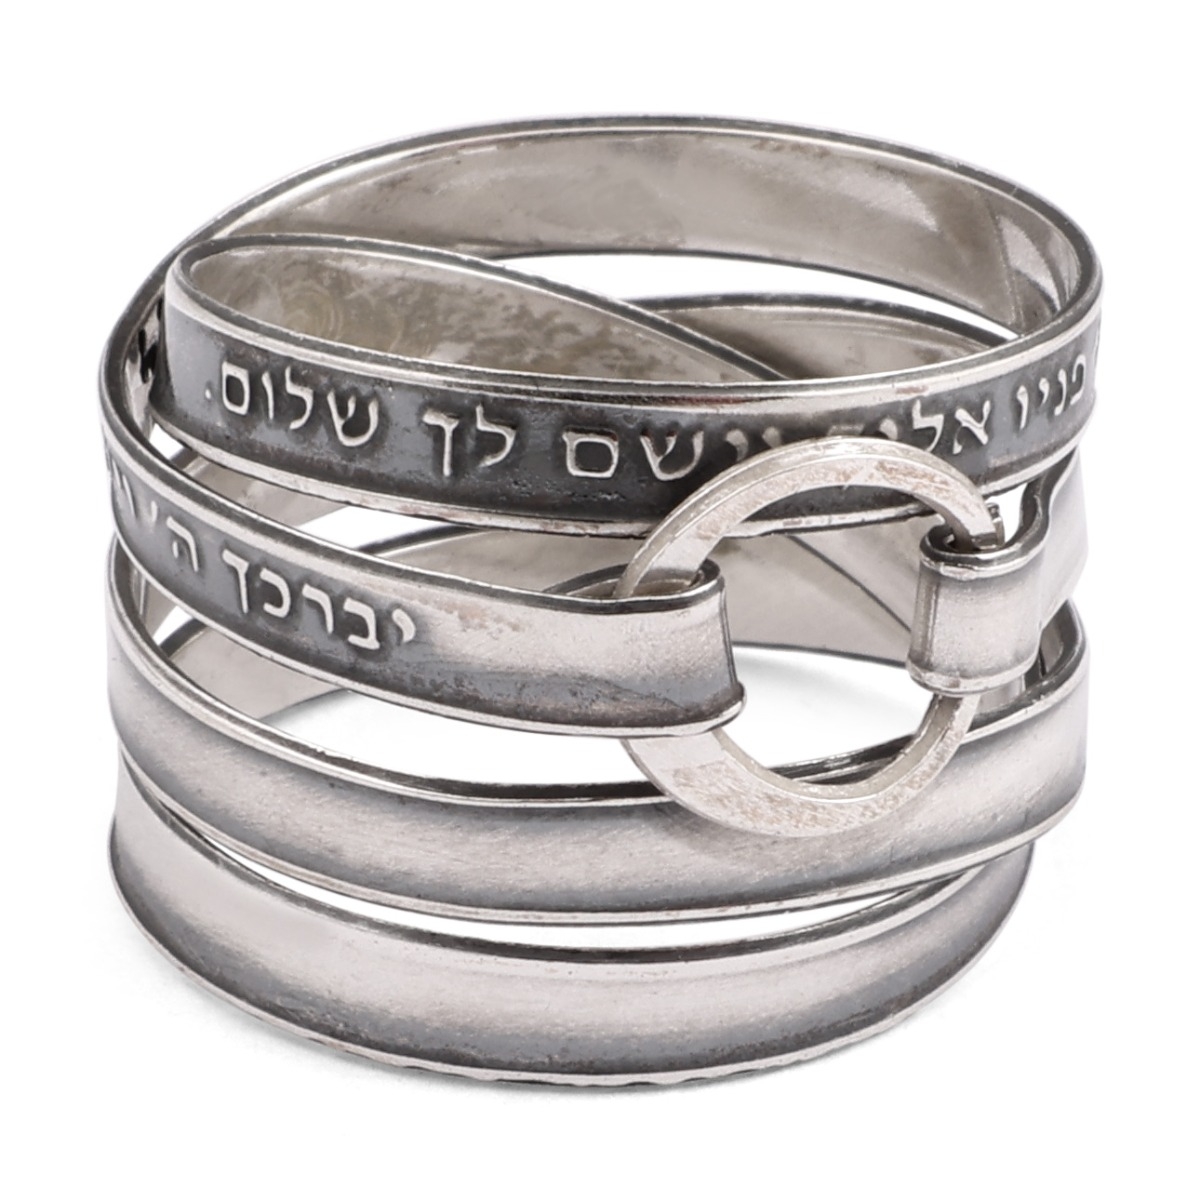 Blackened 925 Sterling Silver Priestly Blessing Wrap Ring (Numbers 6:24-26) - 1